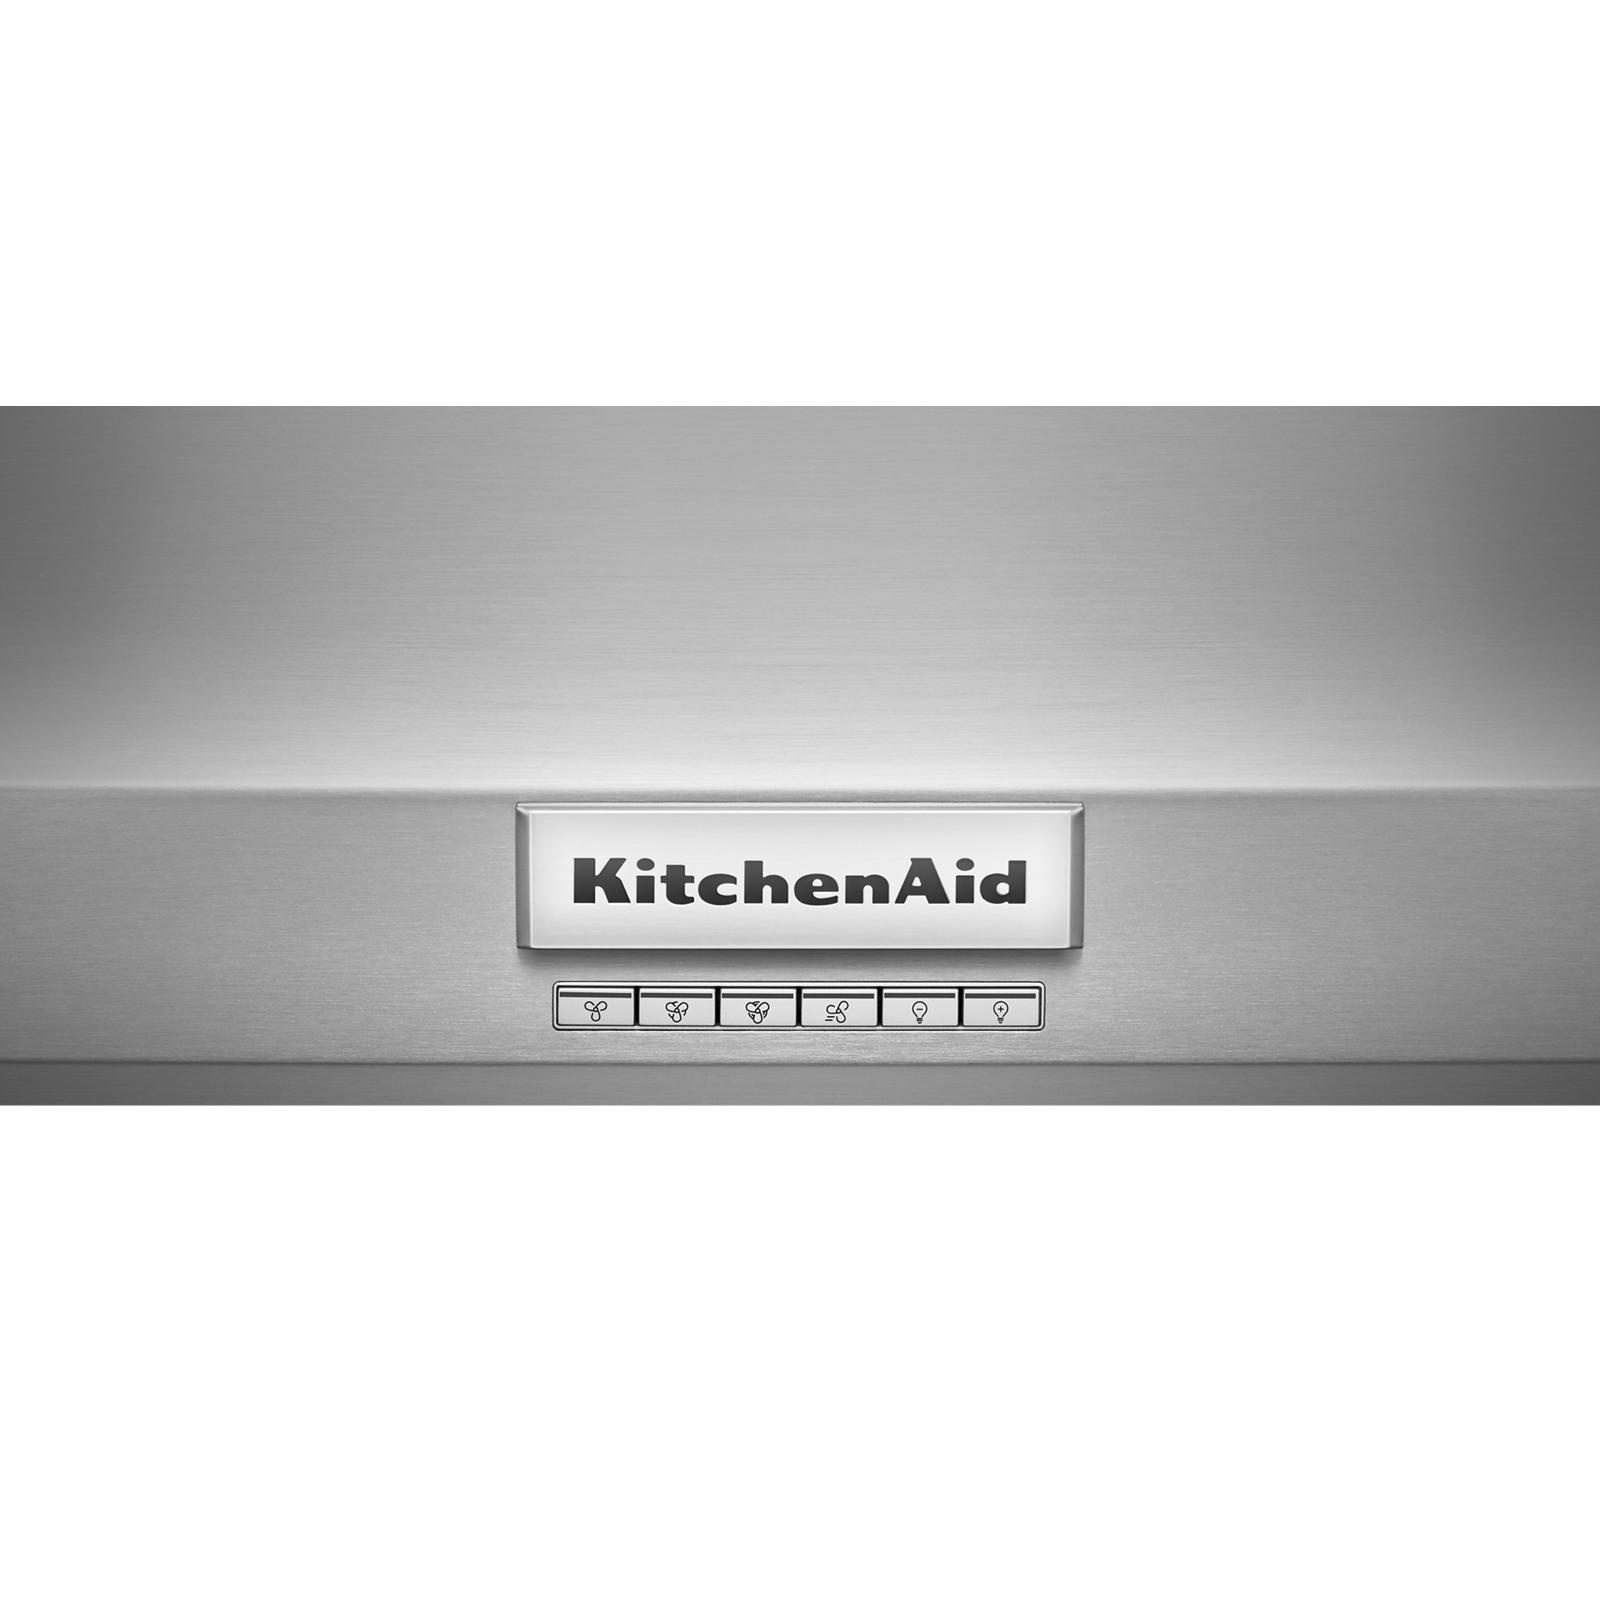 KitchenAid - 36 Inch 585 or 1170 CFM Wall Mount and Chimney Range Vent in Stainless - KVWC956KSS